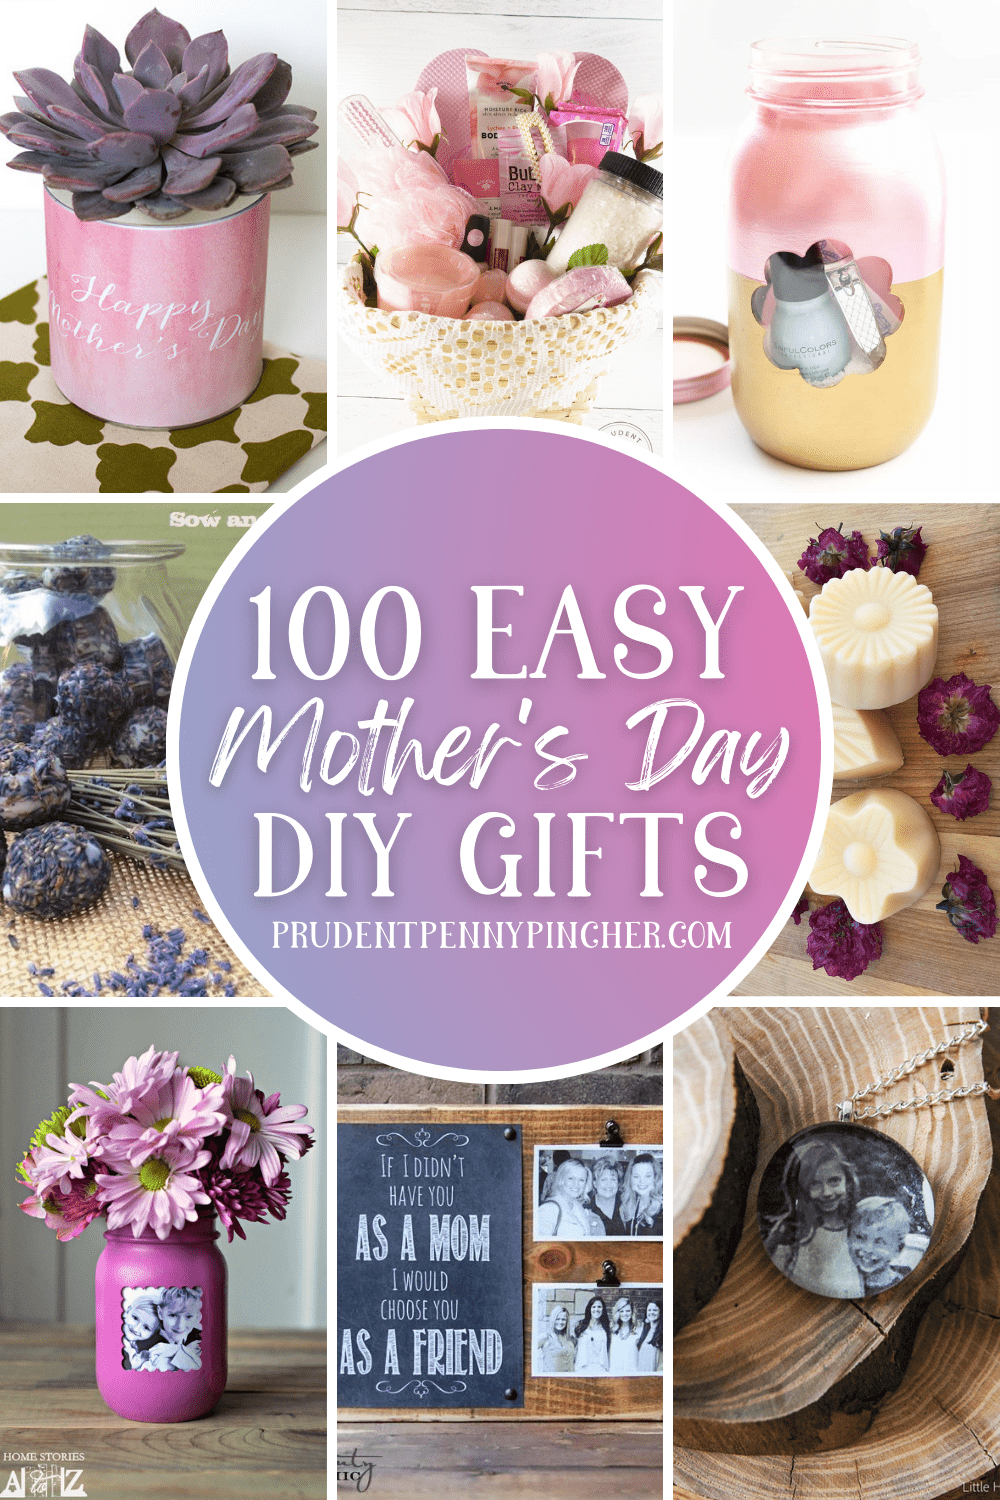 100 Cheap Easy Diy Mother S Day Gifts Prudent Penny Pincher